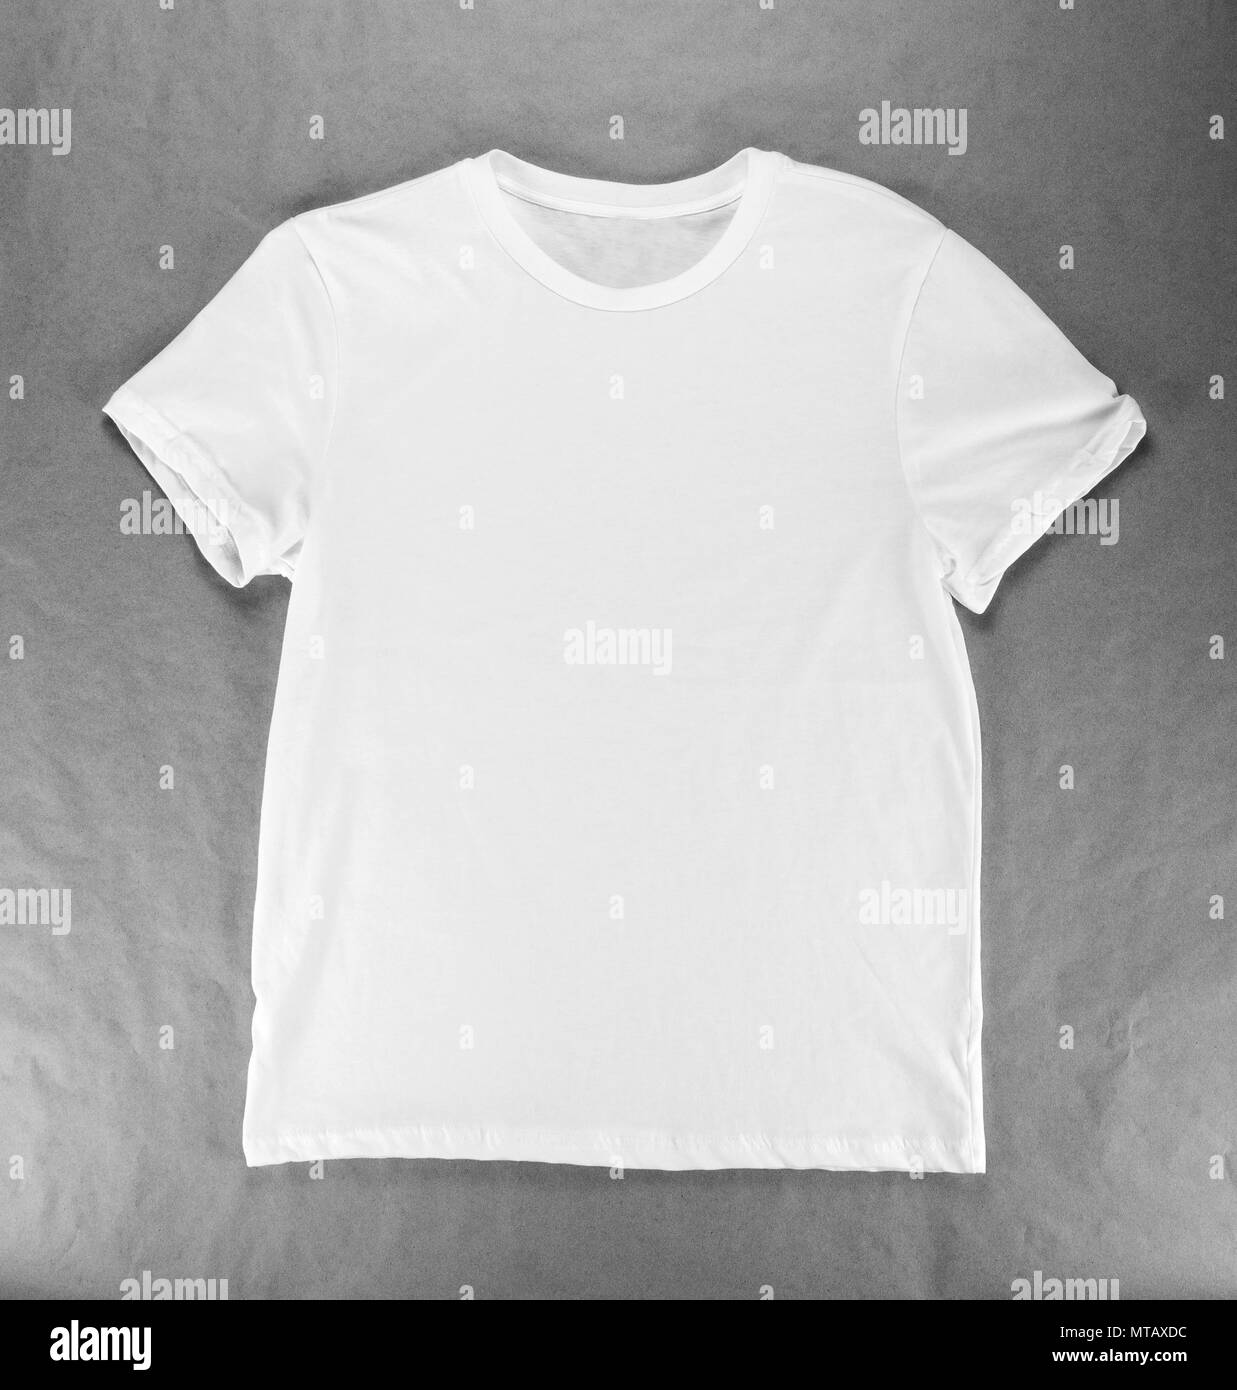 White folded t-shirt template on a craft paper Stock Photo